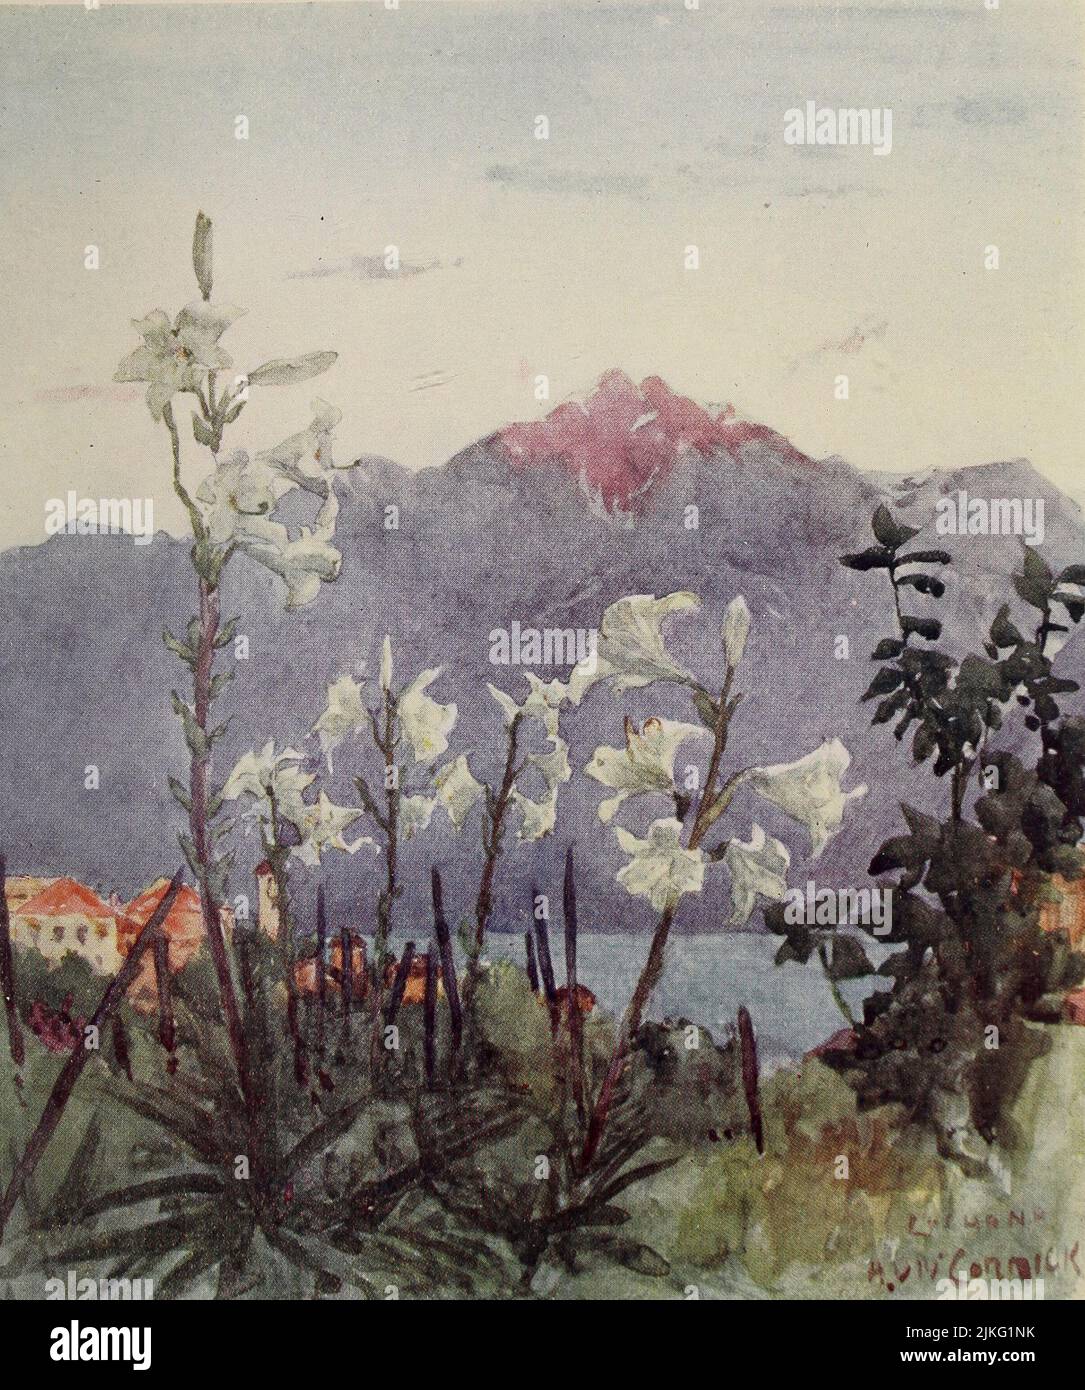 In a Garden at Locarno Last gleam of the sunset on the hills above Lago Maggiore Painted by A. D. McCormick from the book ' The Alps ' by Sir William Martin Conway,  Publication date 1904 Publisher London : Adam and Charles Black Arthur David McCormick FRGS (Coleraine 14 October 1860 – 1943) was a notable British illustrator and painter of landscapes, historical scenes, naval subjects, and genre scenes. Stock Photo